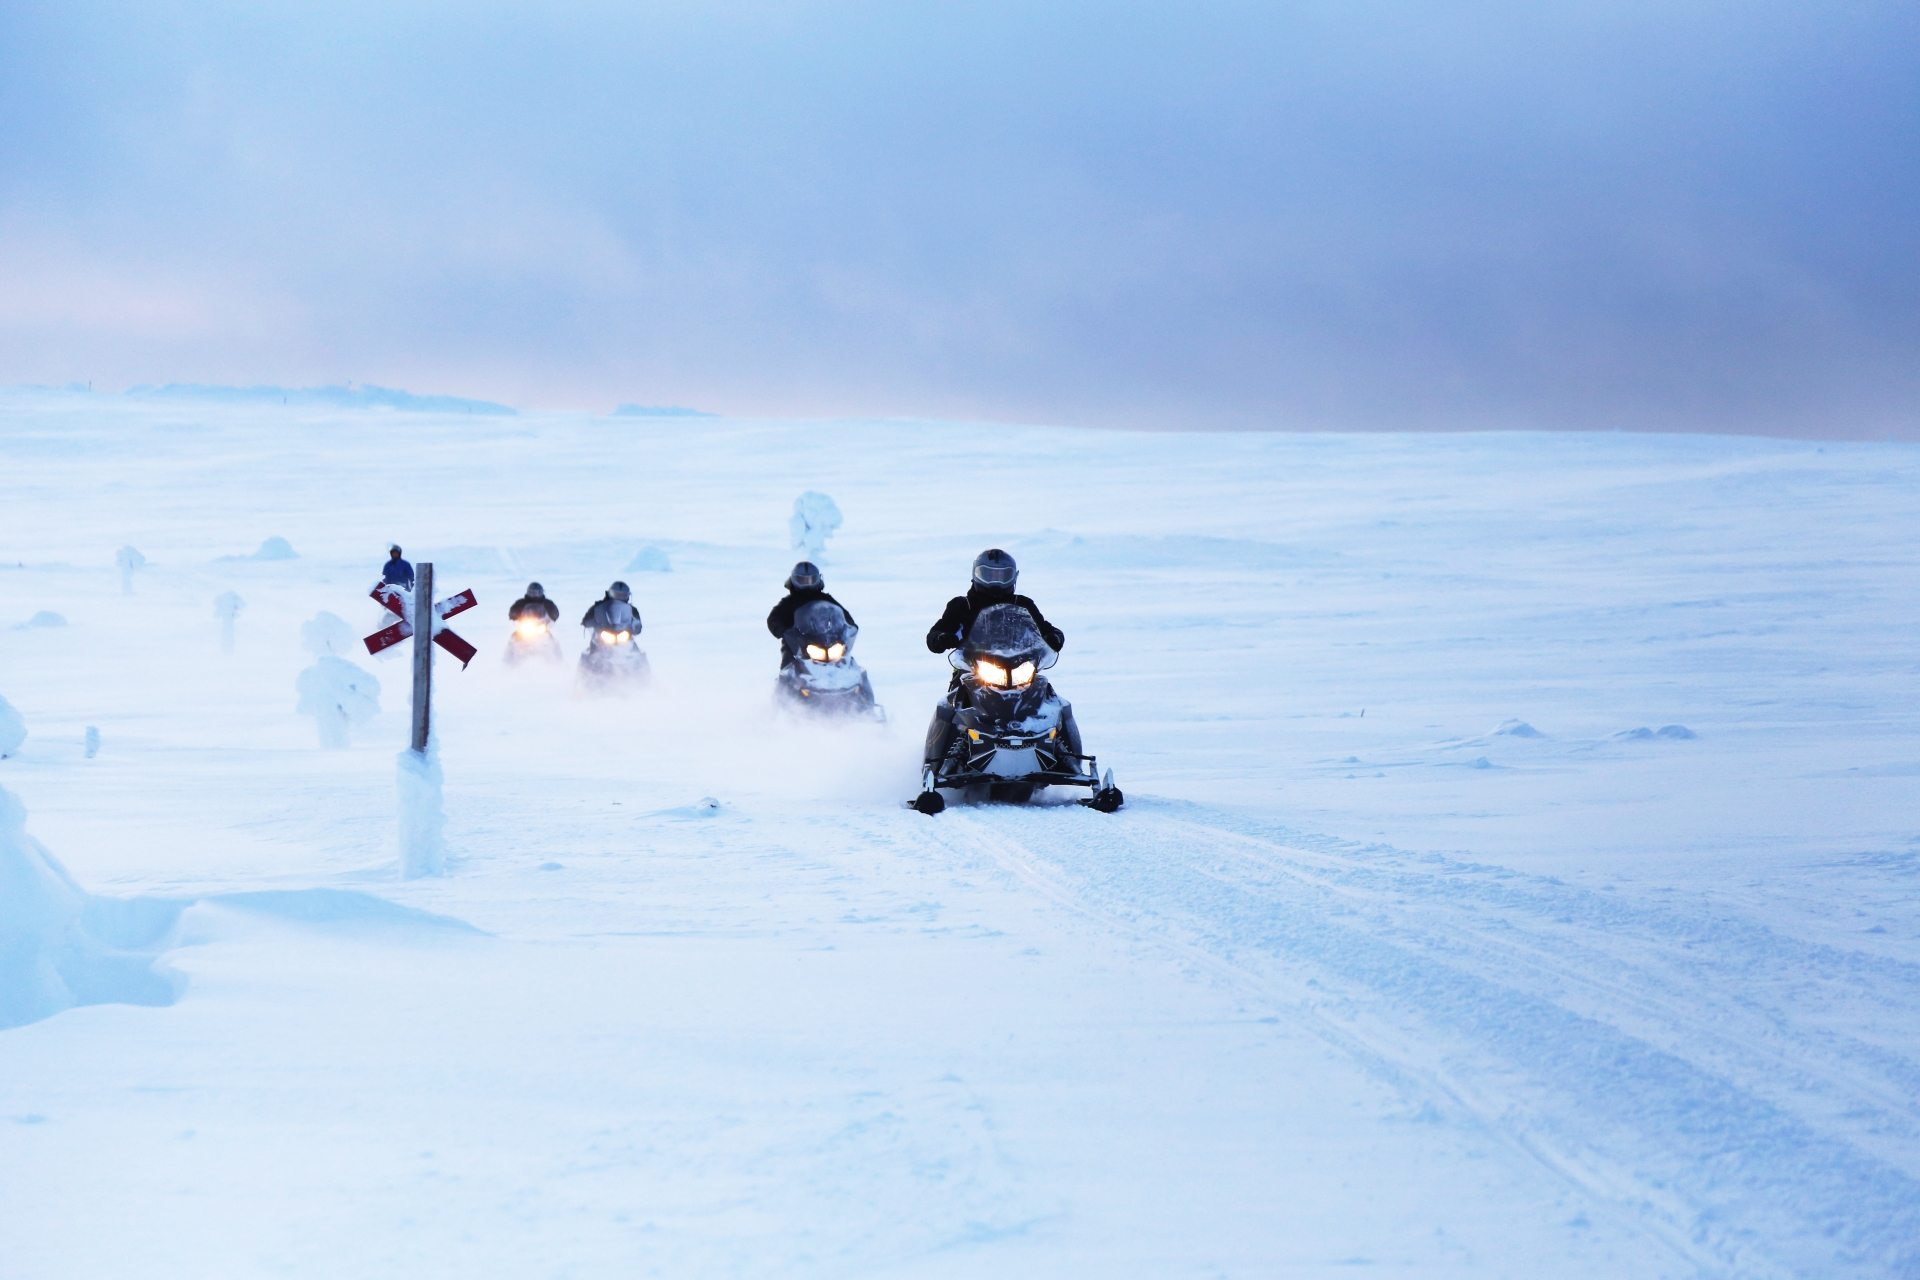 Snowmobiles - A magical trip to visit Father Christmas